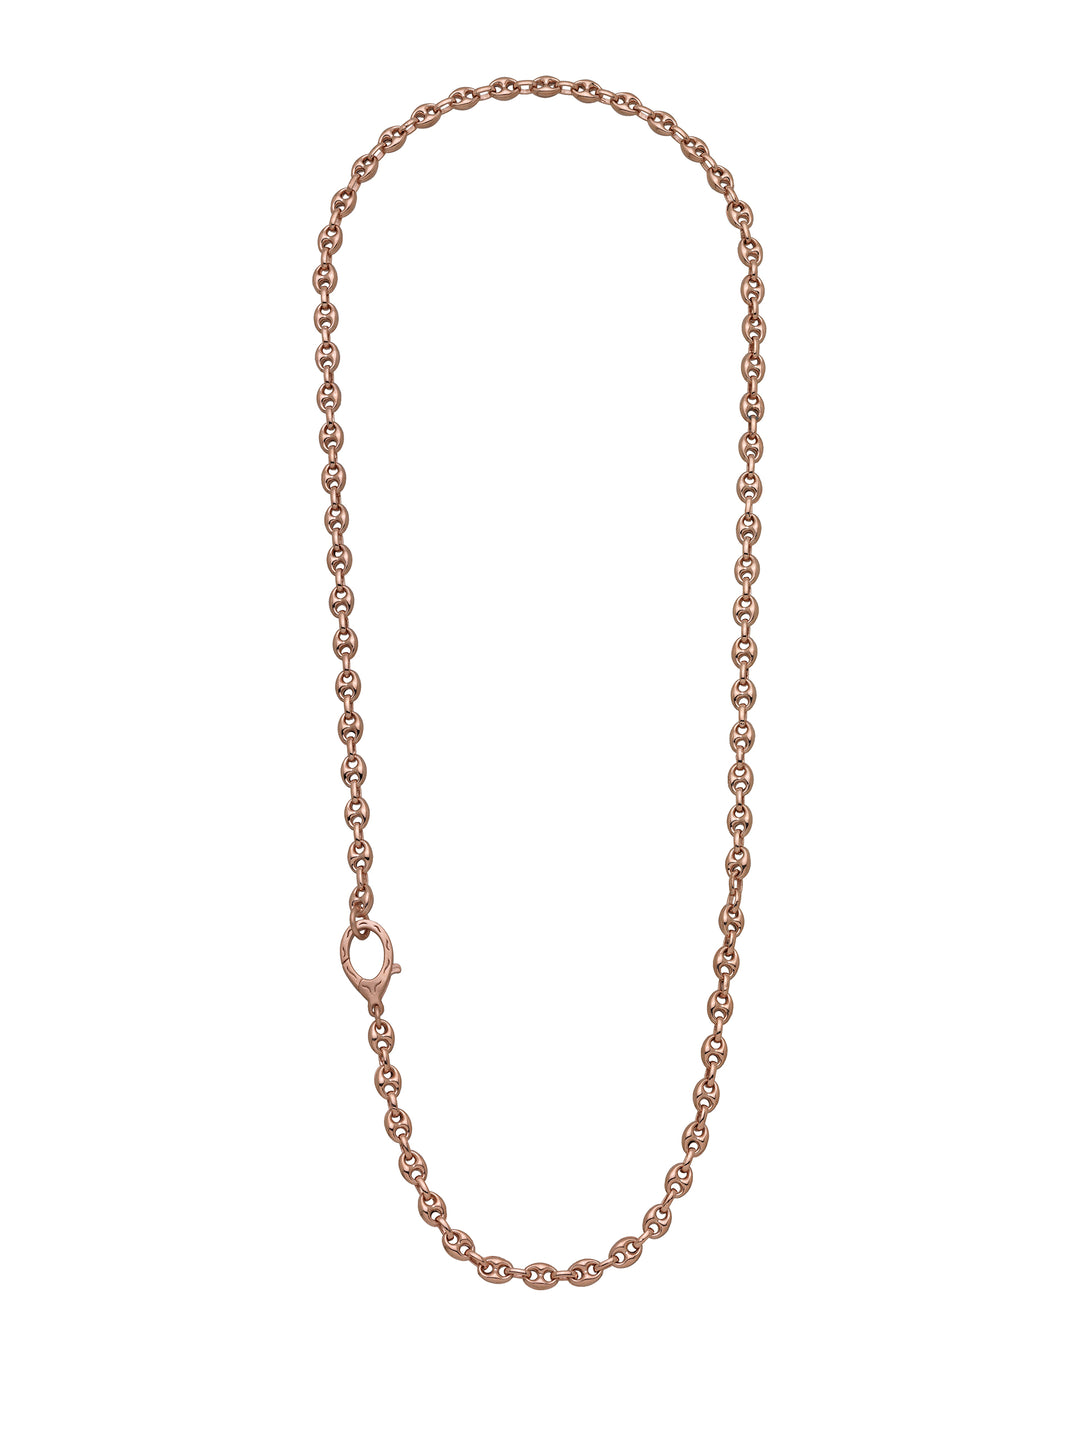 Ulysses Marine 18K Rose Gold Vermeil Necklace with Polished Chain and Matte Clasp